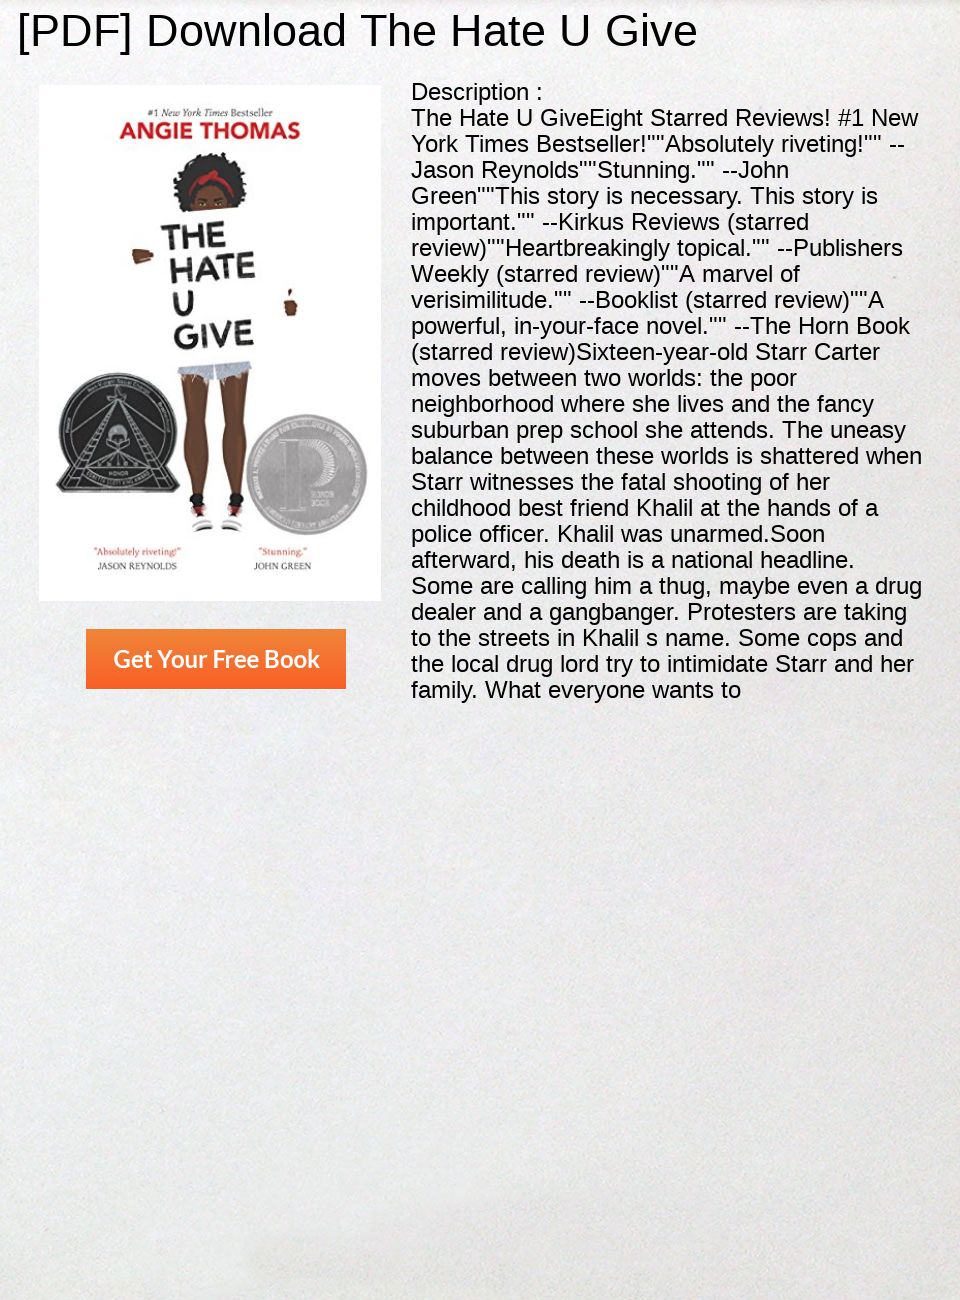 thesis on the hate you give